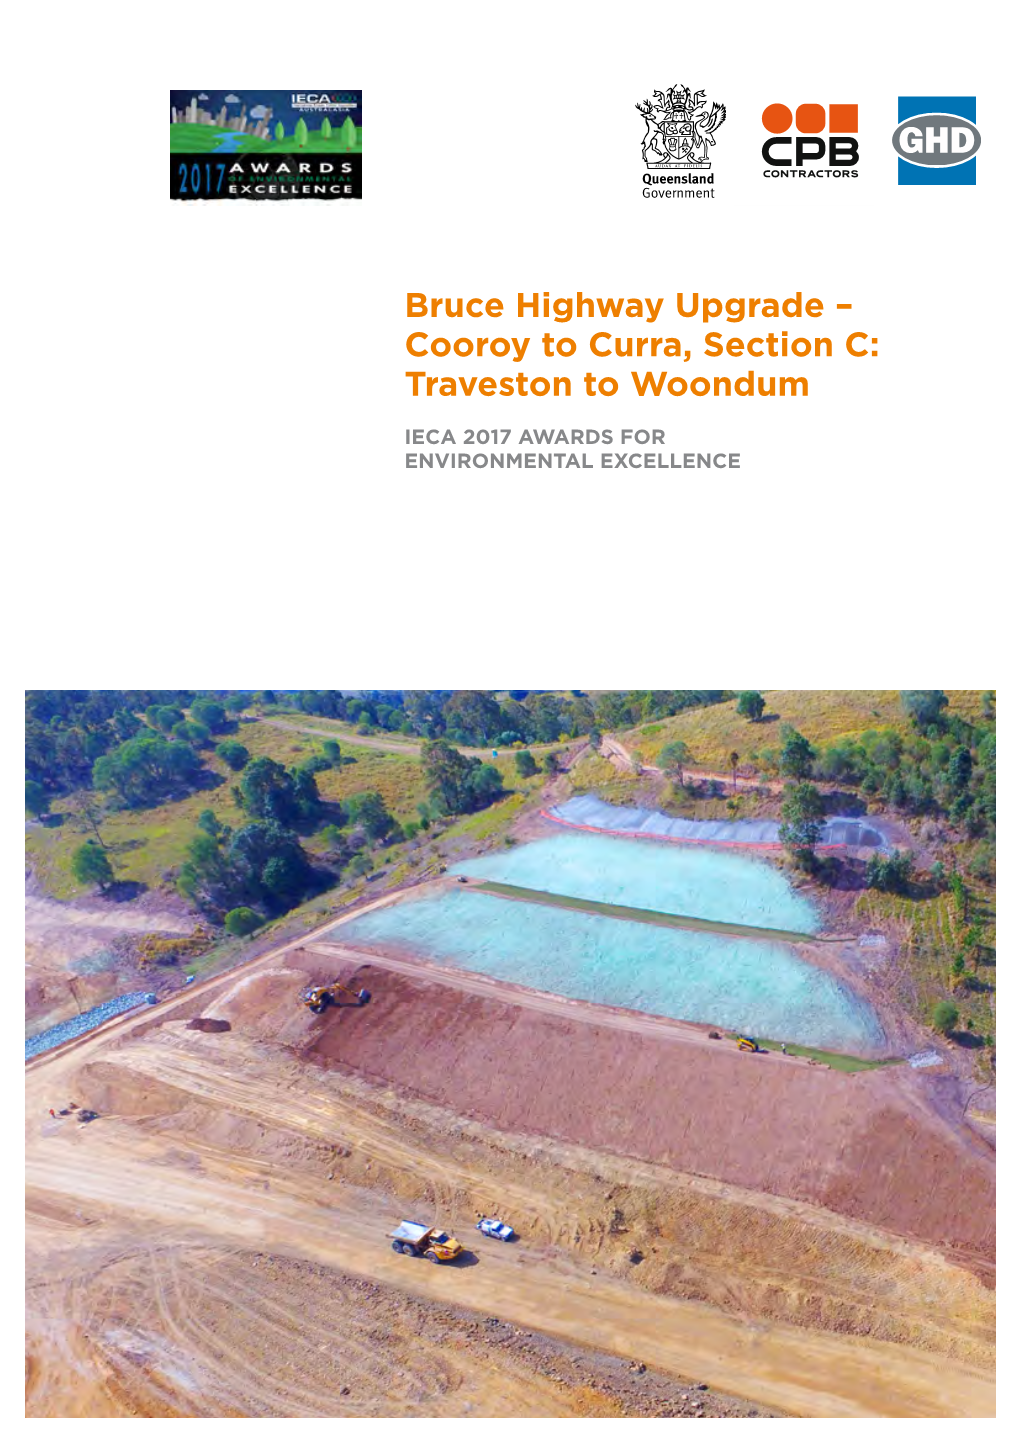 Bruce Highway Upgrade – Cooroy to Curra, Section C: Traveston to Woondum